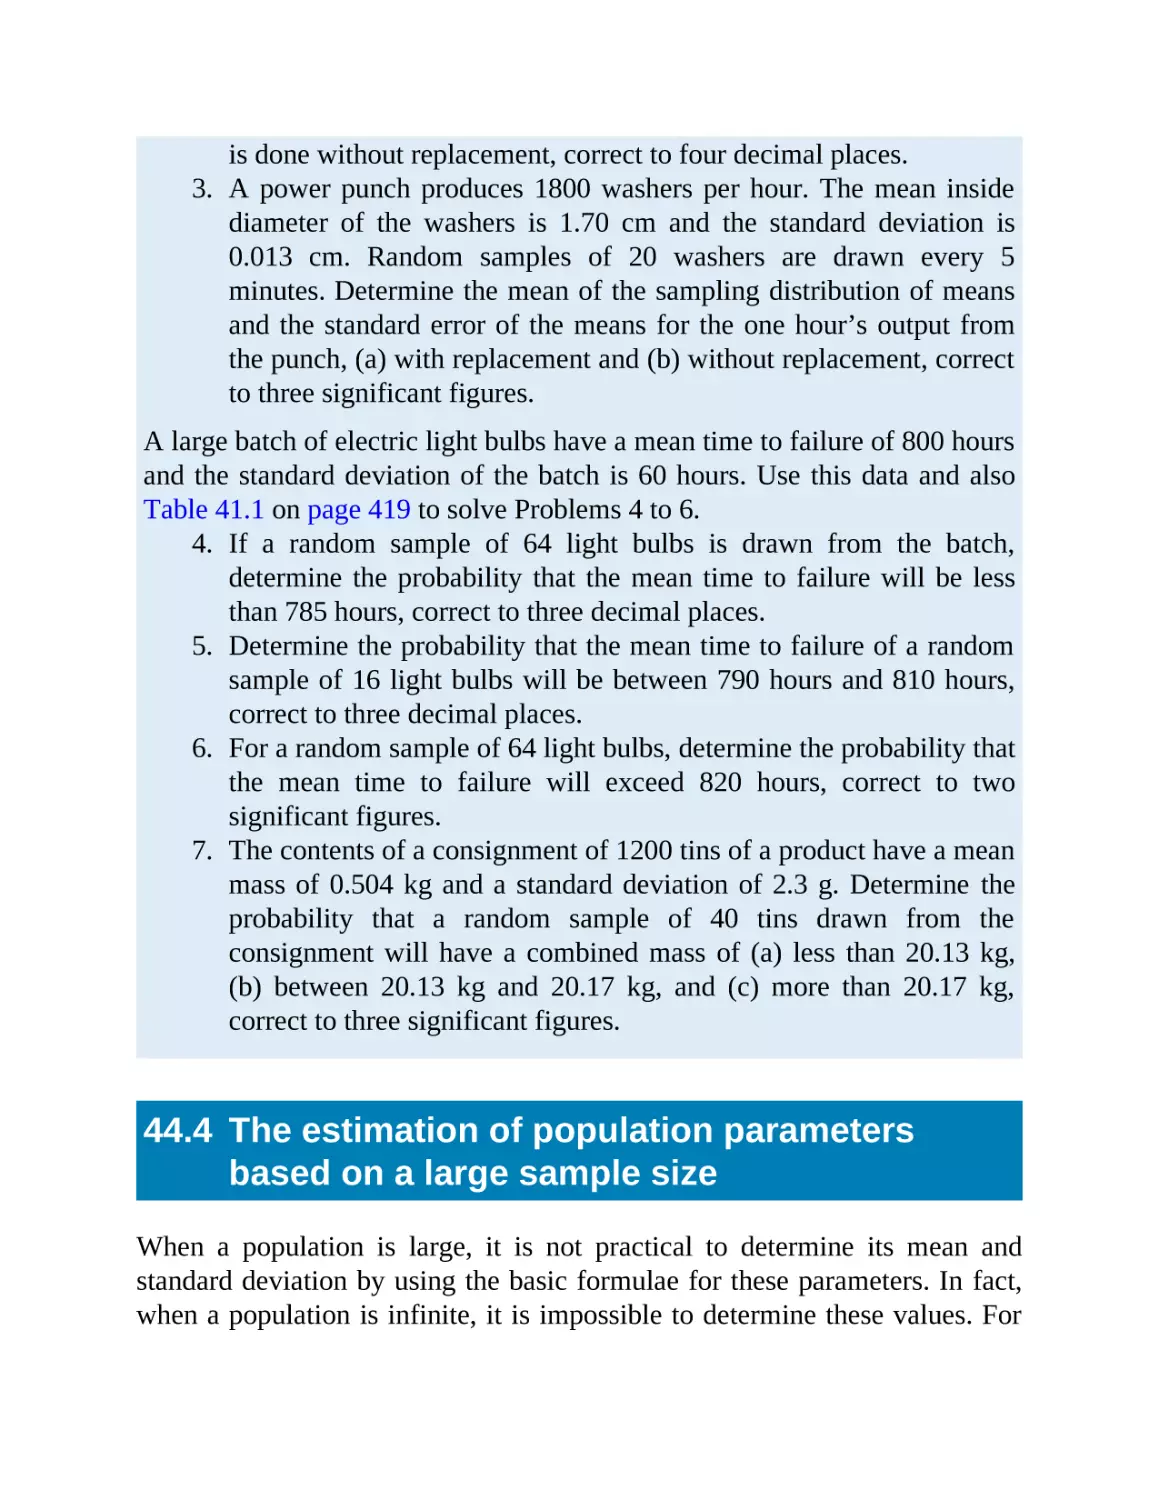 44.4 The estimation of population parameters based on a large sample size